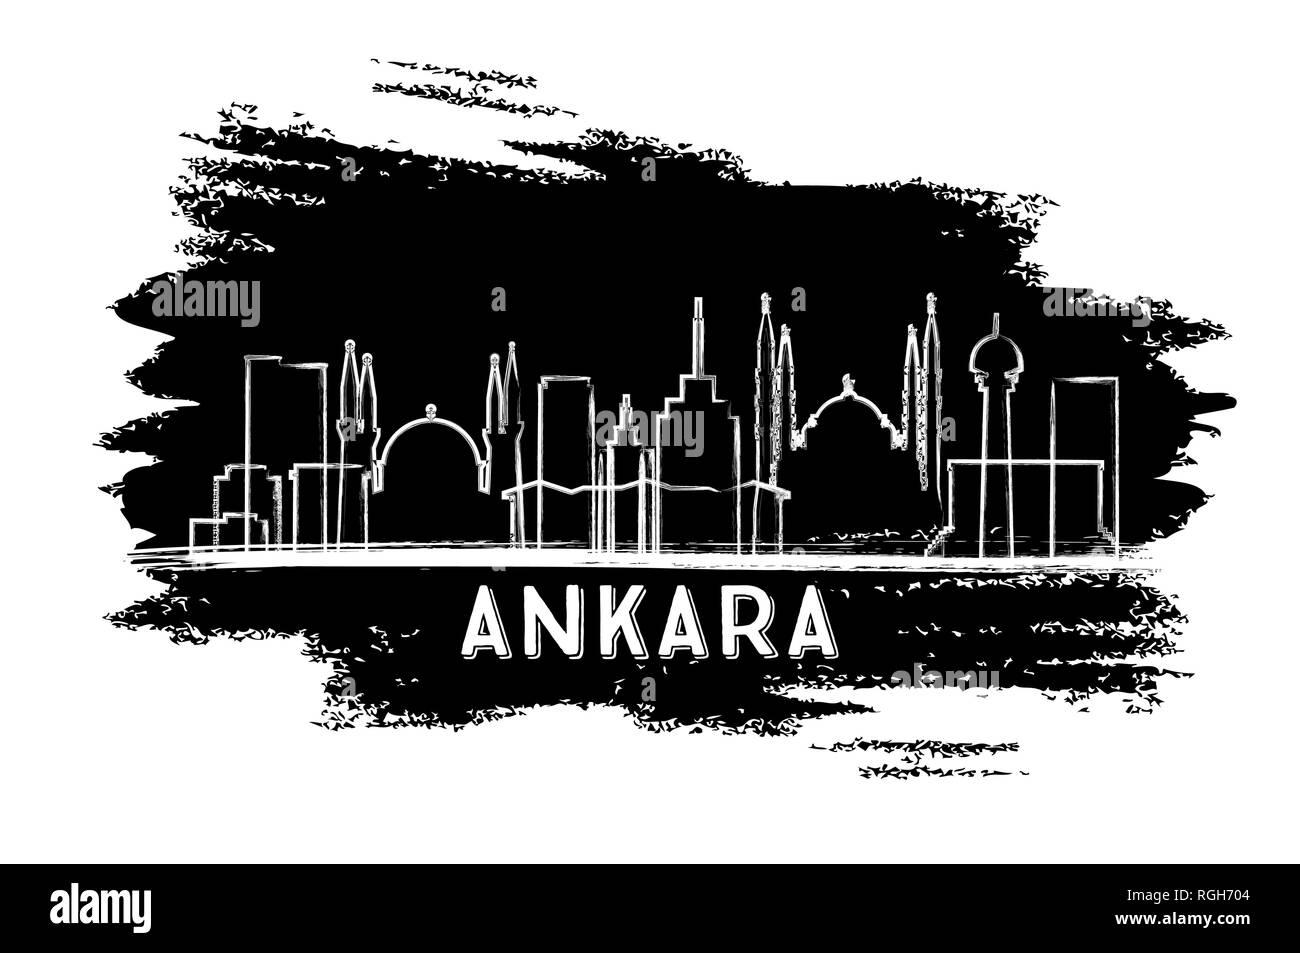 Ankara Turkey City Skyline Silhouette. Hand Drawn Sketch. Vector Illustration. Business Travel and Tourism Concept with Historic Architecture. Stock Vector